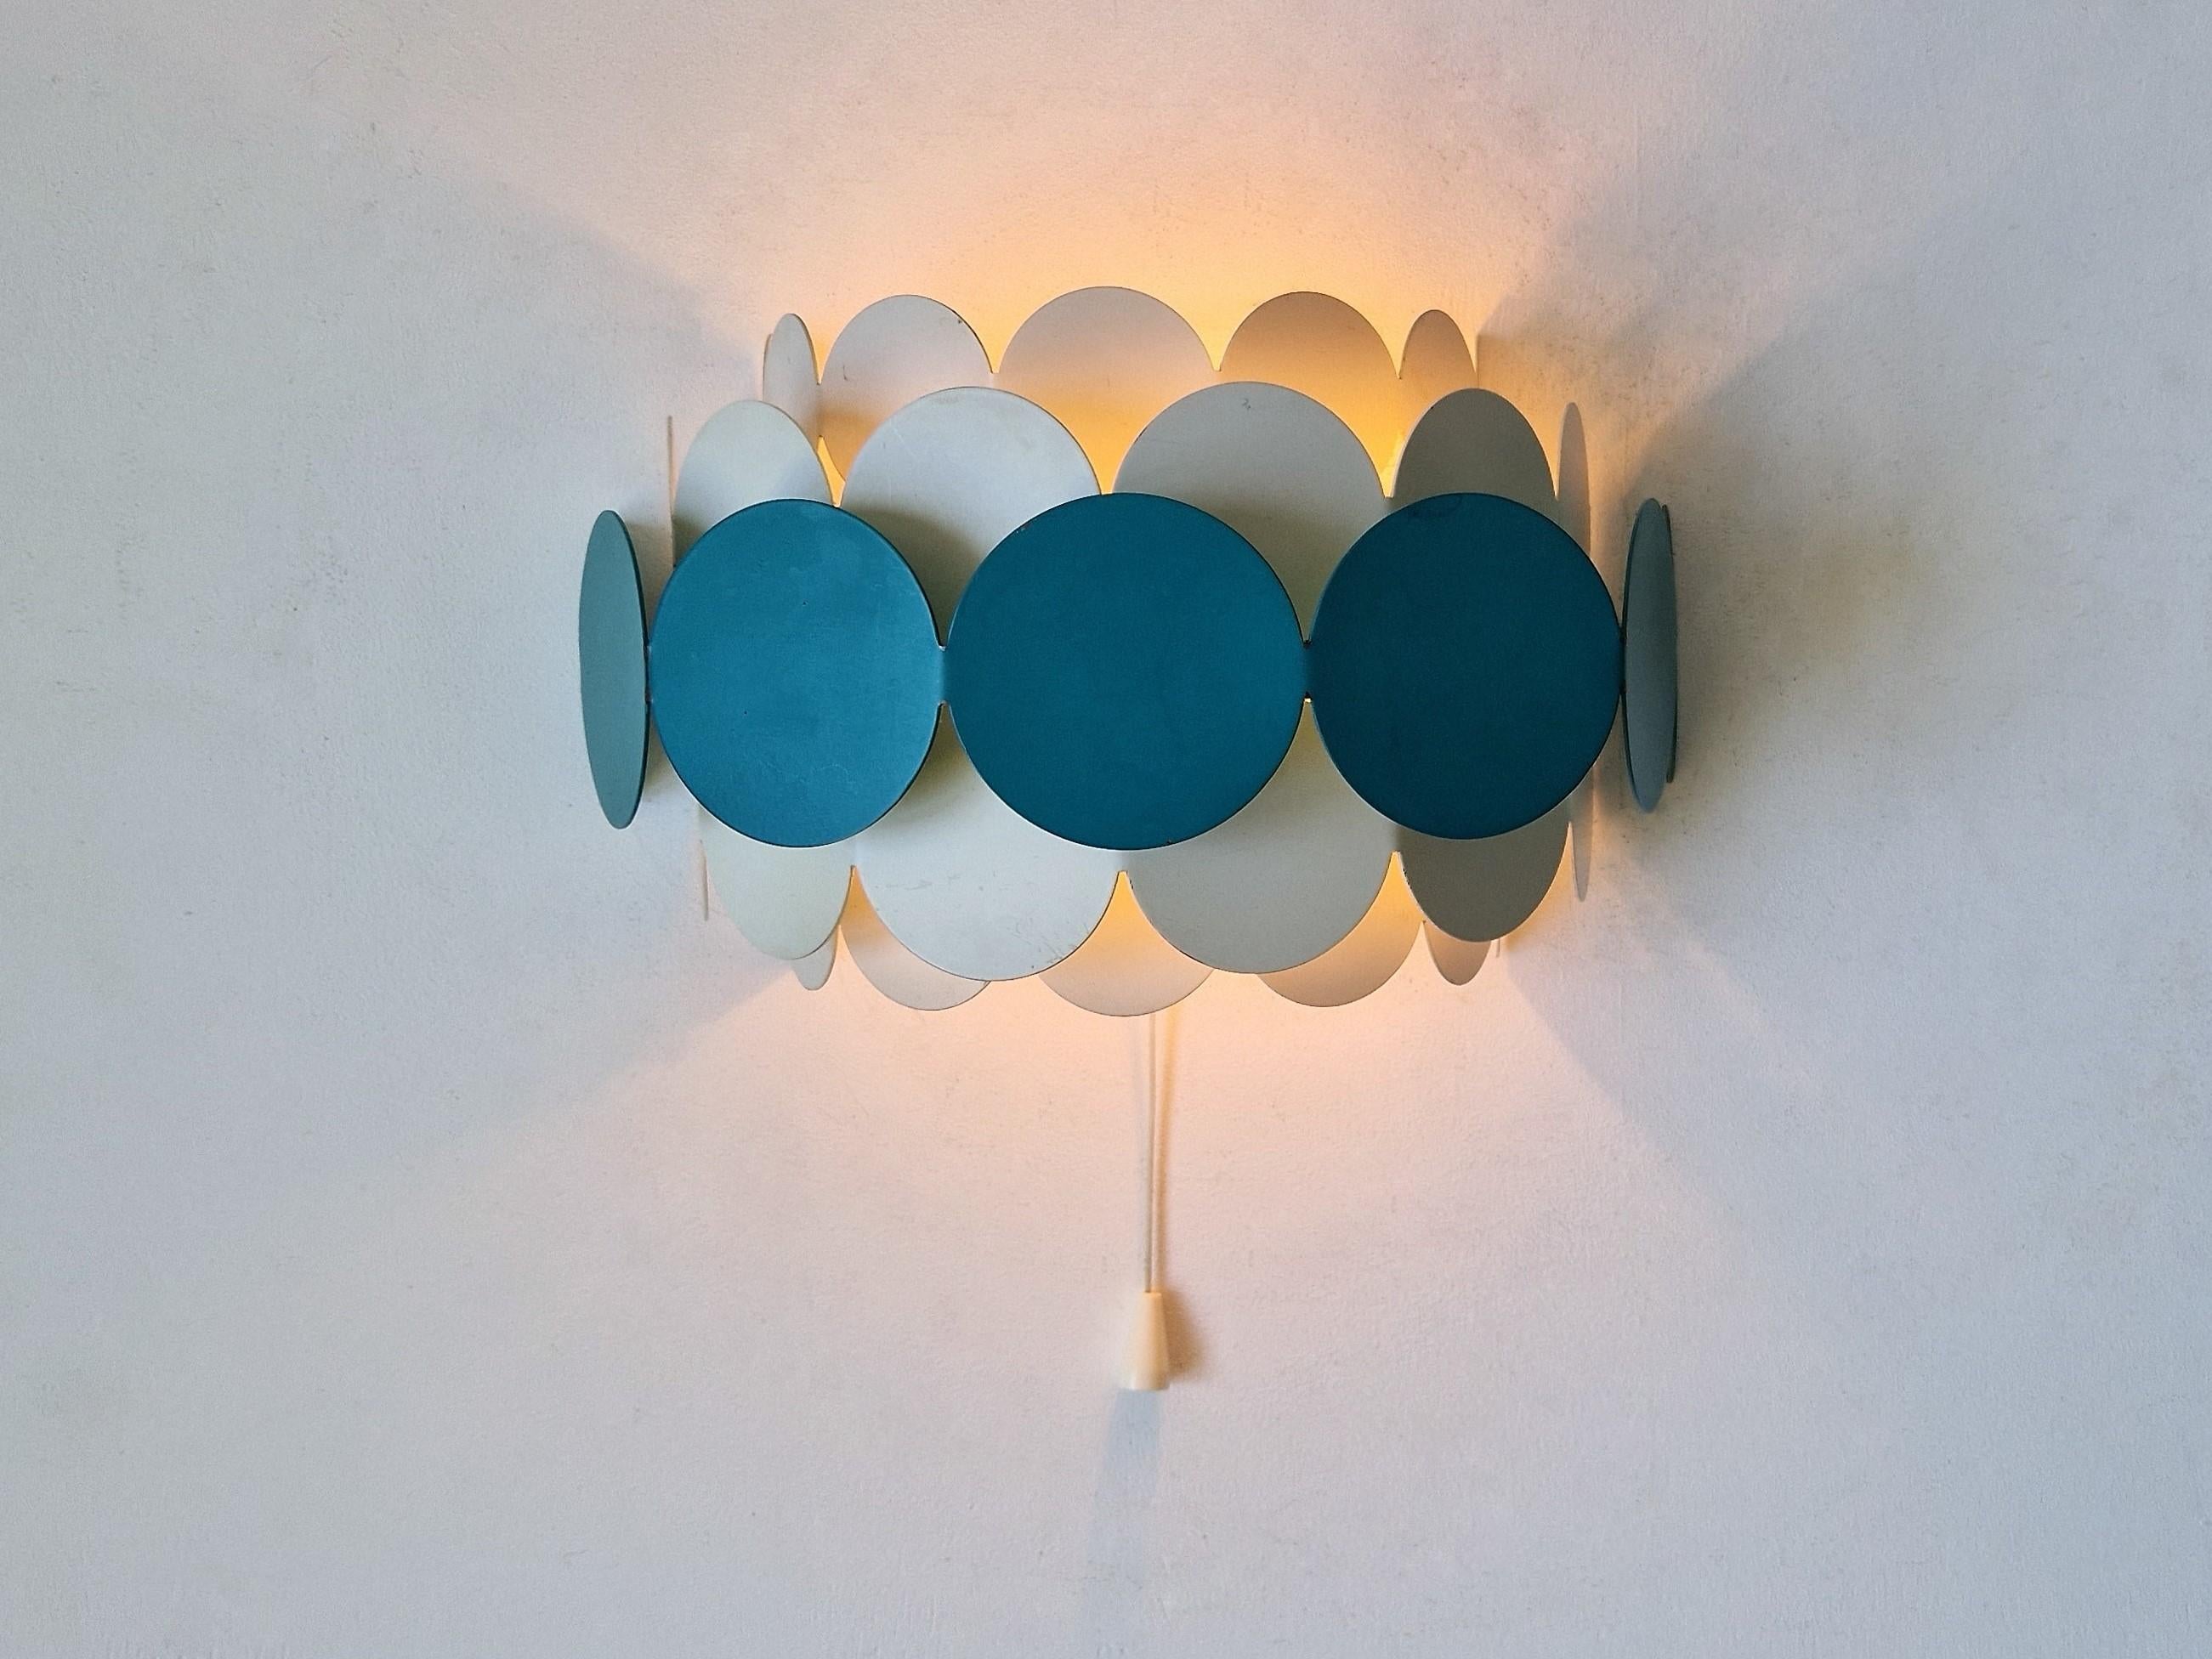 Bright Petrol and White Wall Lamps by Doria Leuchten, Germany 1960's/1970's For Sale 2